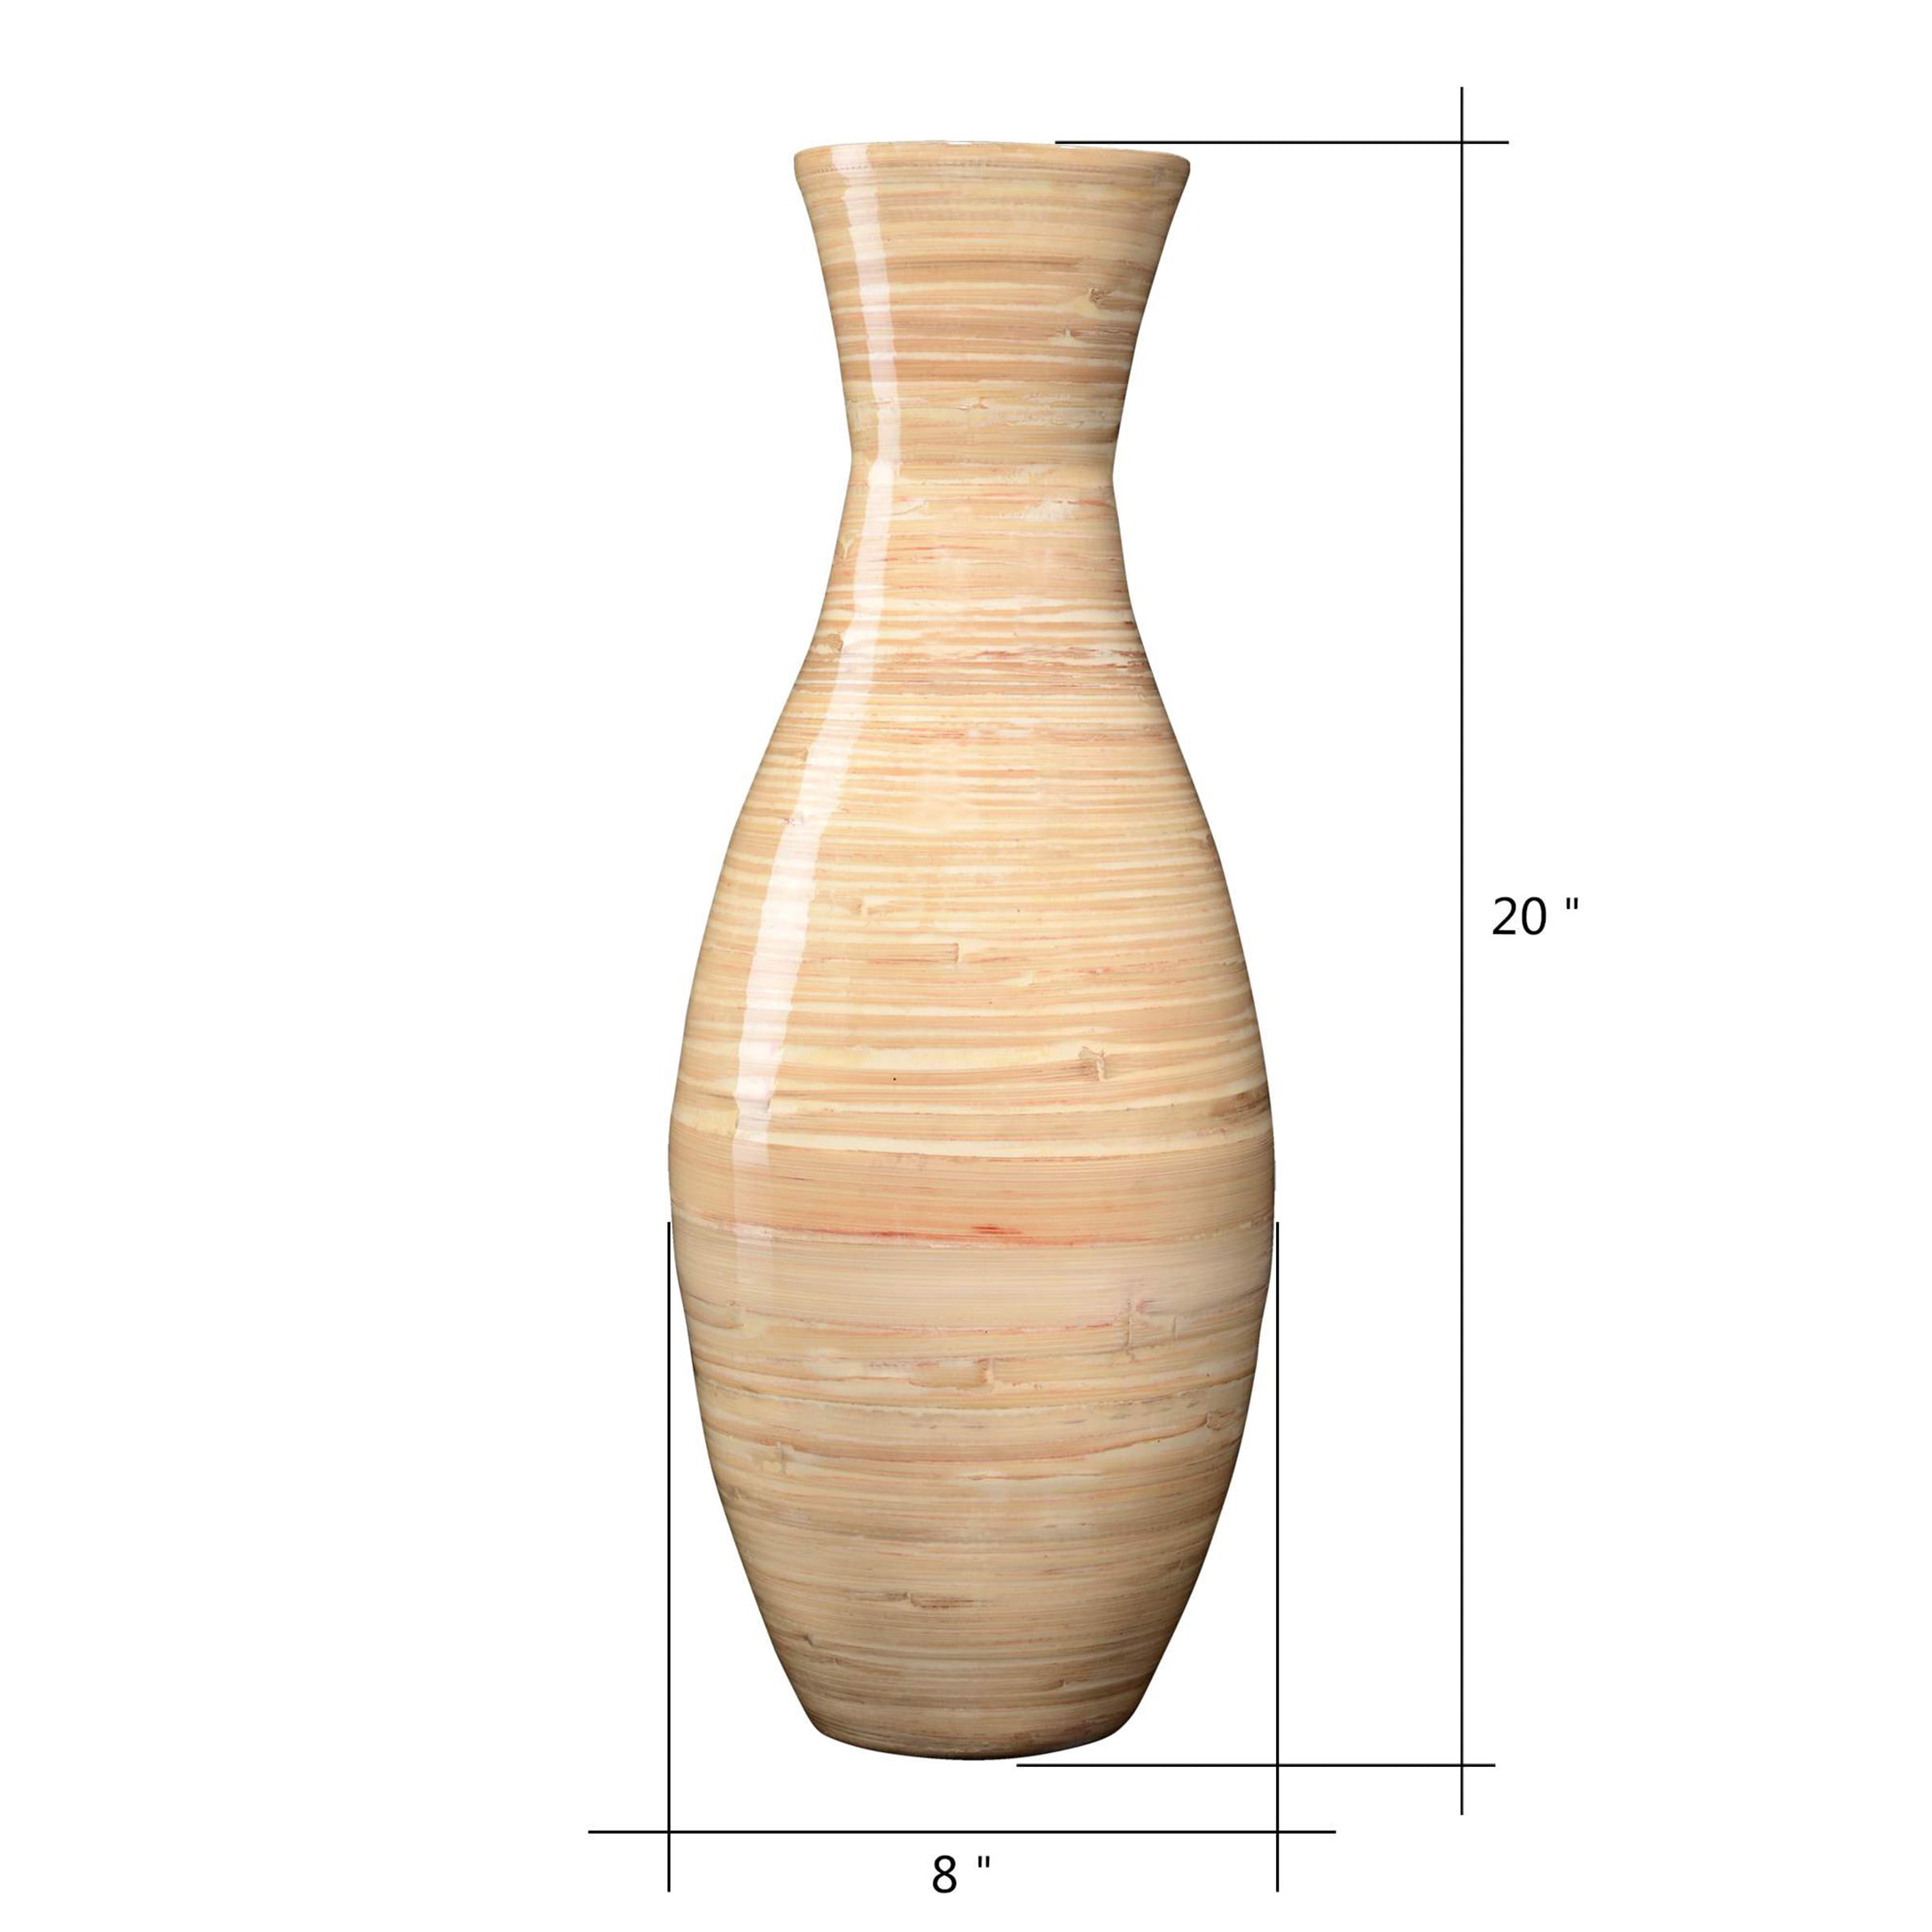 Flowers Filler Decor Sustainable Bamboo Trademark 83-DEC7039 Villacera Handcrafted 28” Tall Brown Classic Floor Vase for Silk Plants